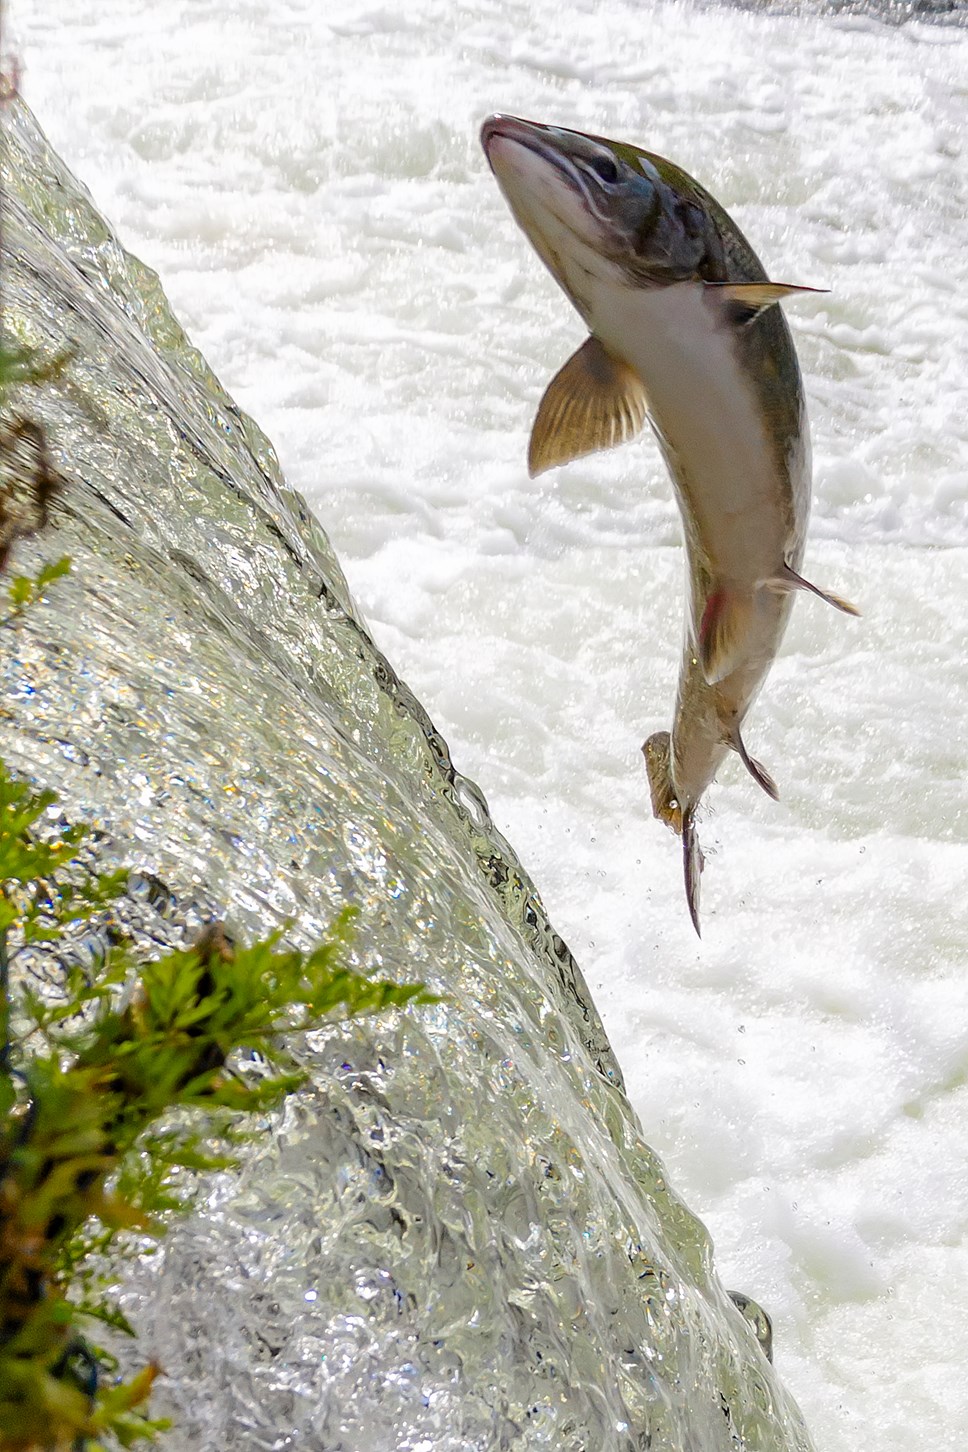 Male Atlantic salmon trying to overcome a disused weir during its upstream migration. 
Photo Credit: Manuel Mendez Blanco